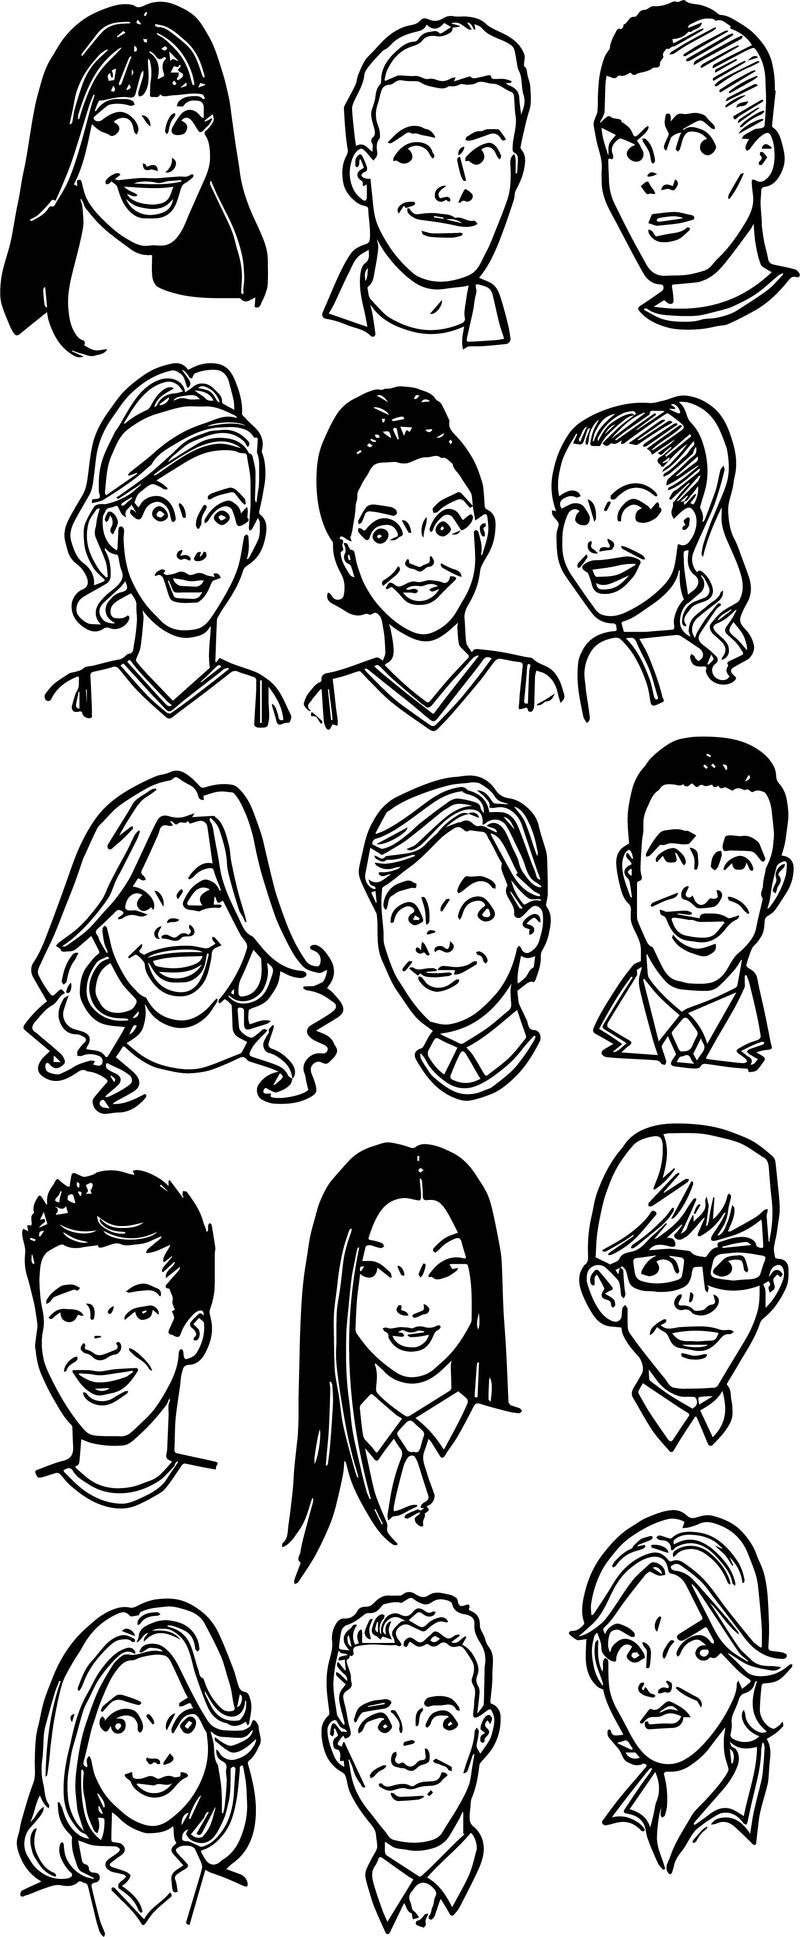 Archie Coloring Pages Glee Archie Faces Coloring Page Printable Coloring Pages For Kids